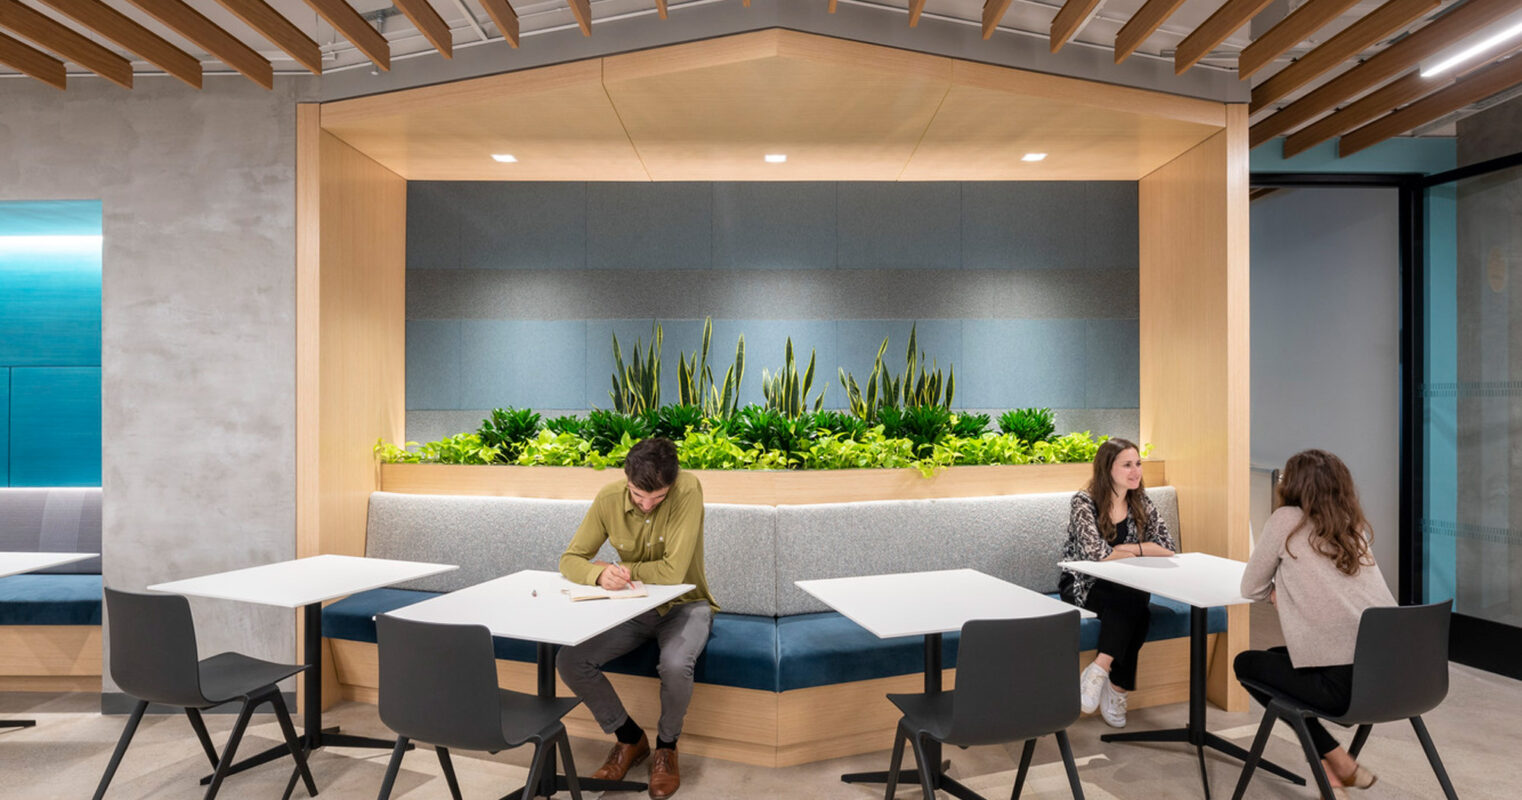 Modern office break area featuring a central plant bed with lush greenery, surrounded by high-backed banquettes and minimalist tables, under a ceiling adorned with warm wood slats and integrated lighting, providing a tranquil space for relaxation and informal meetings.